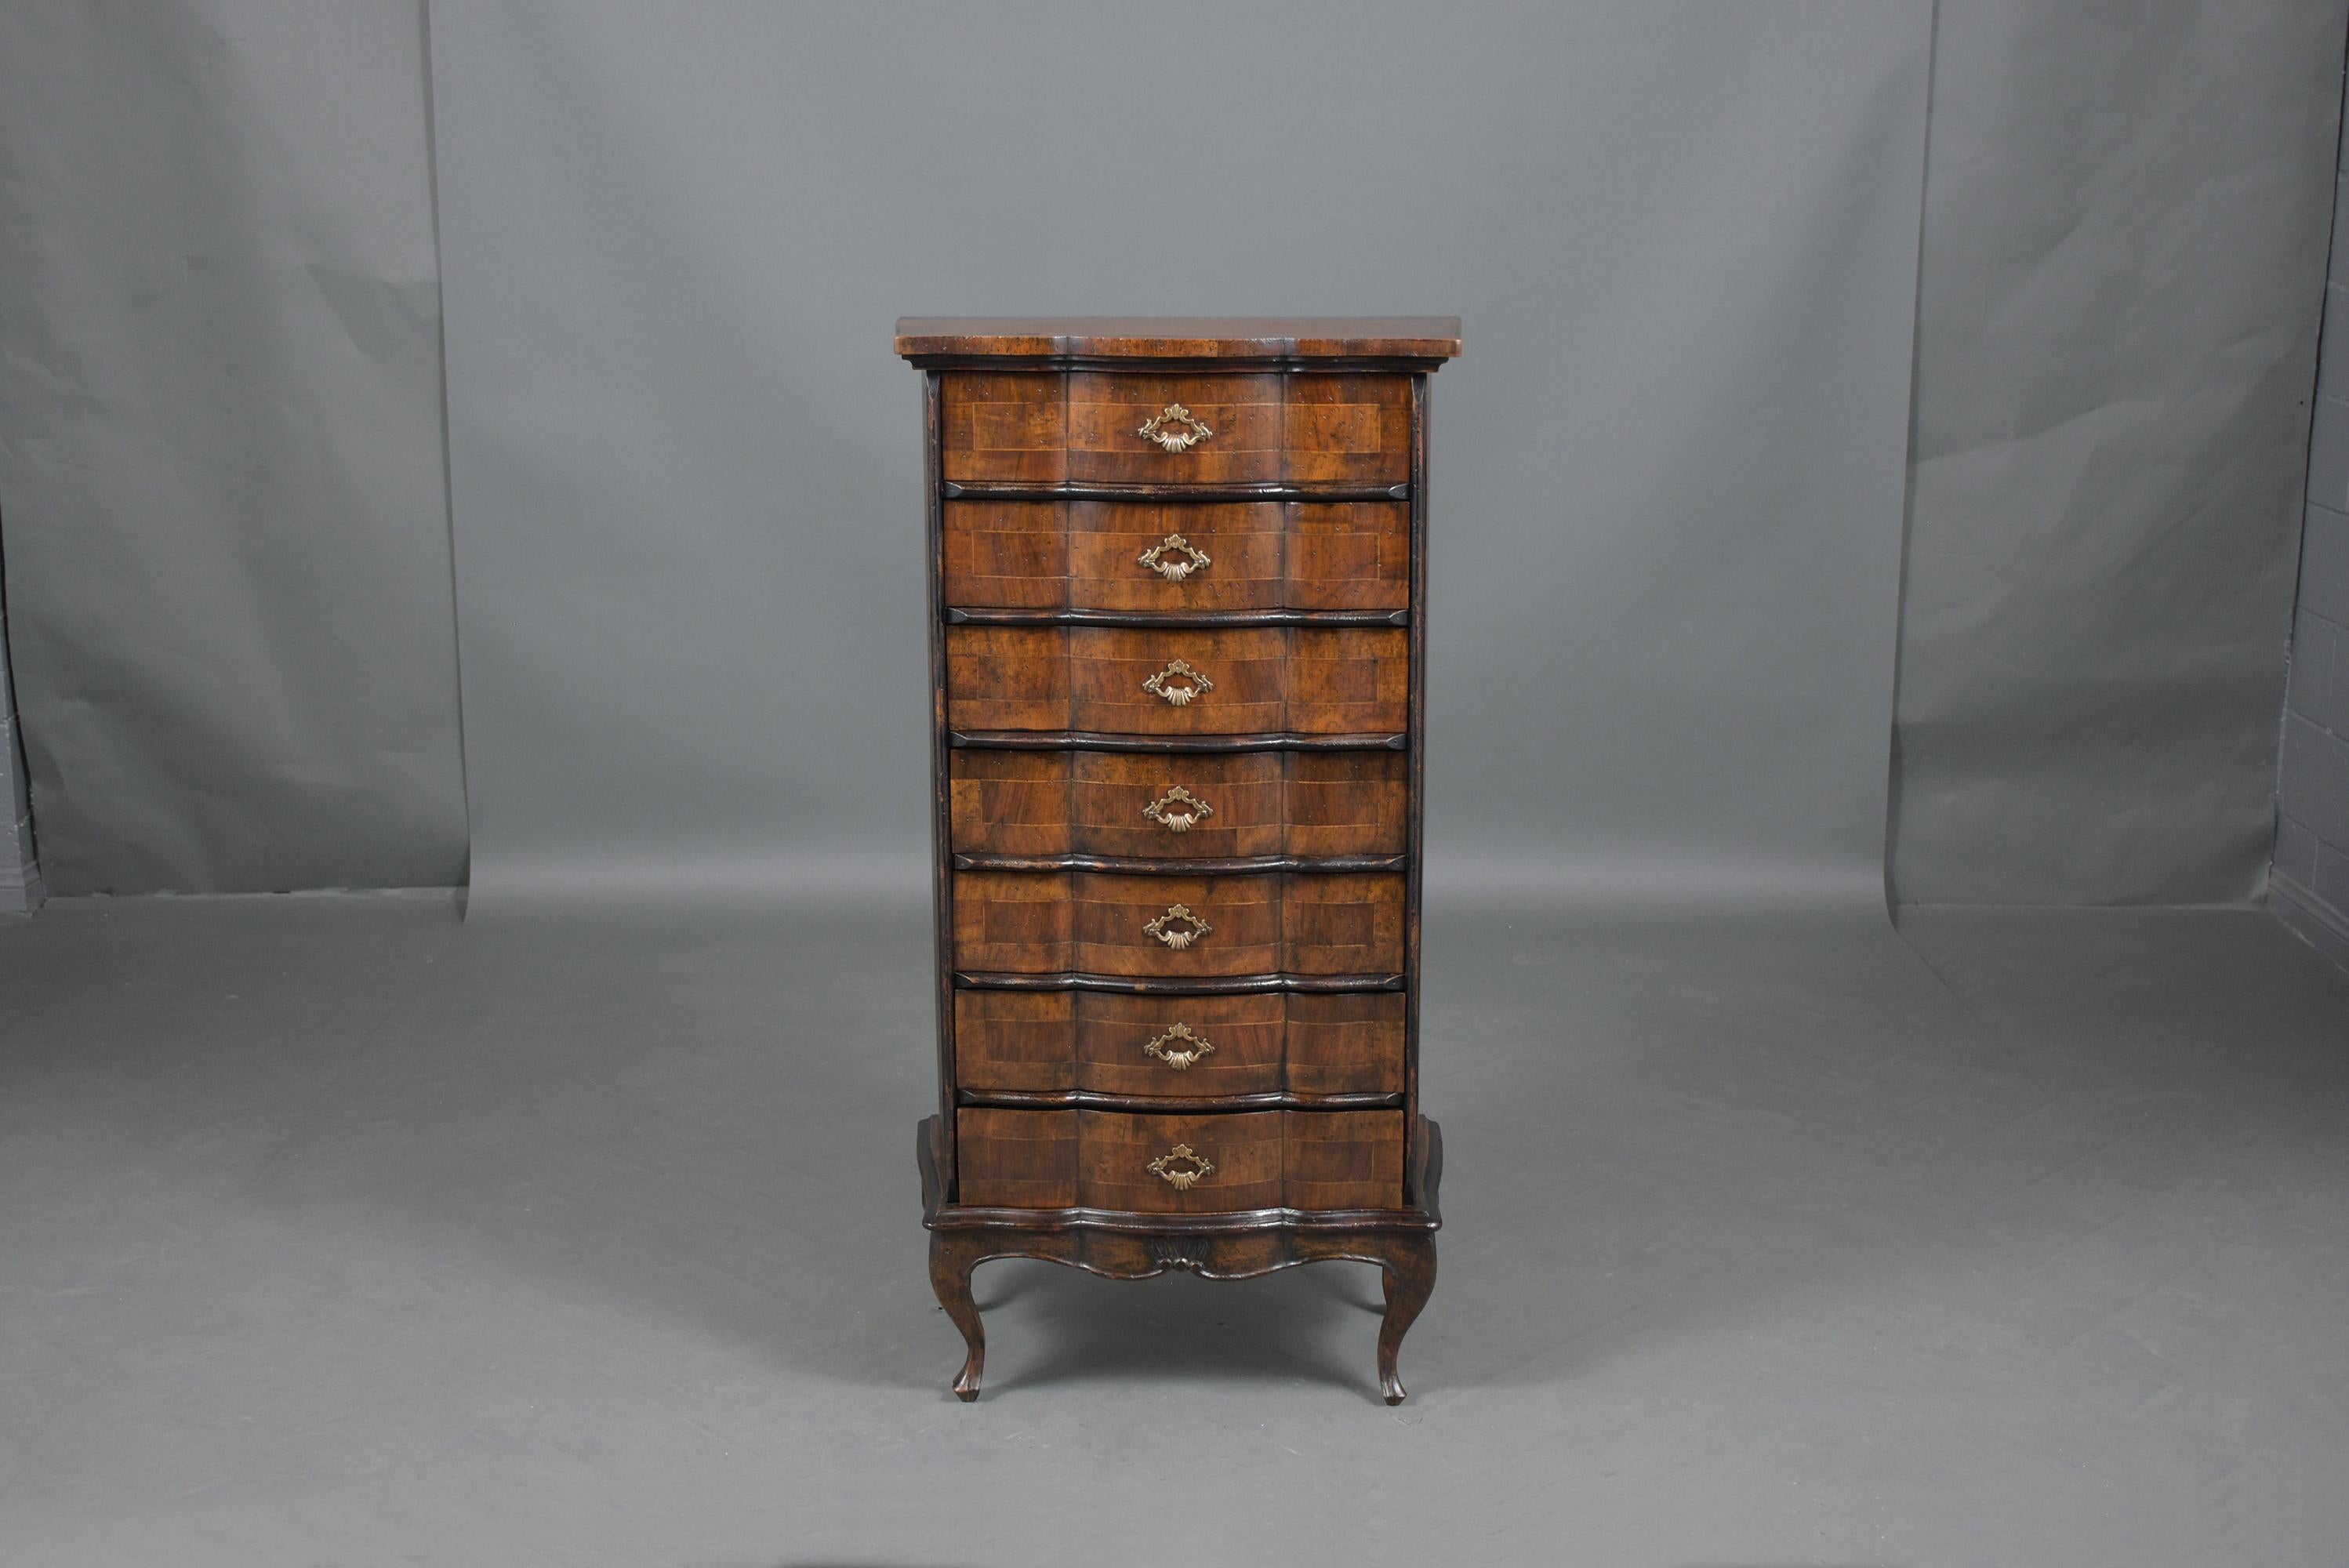 An extraordinary tall chest of drawers hand-crafted out of walnut wood and is professionally restored by our craftsmen. This fabulous cabinet features dark walnut color ebonized moldings, a beautiful patina finish, and seven drawers each is covered